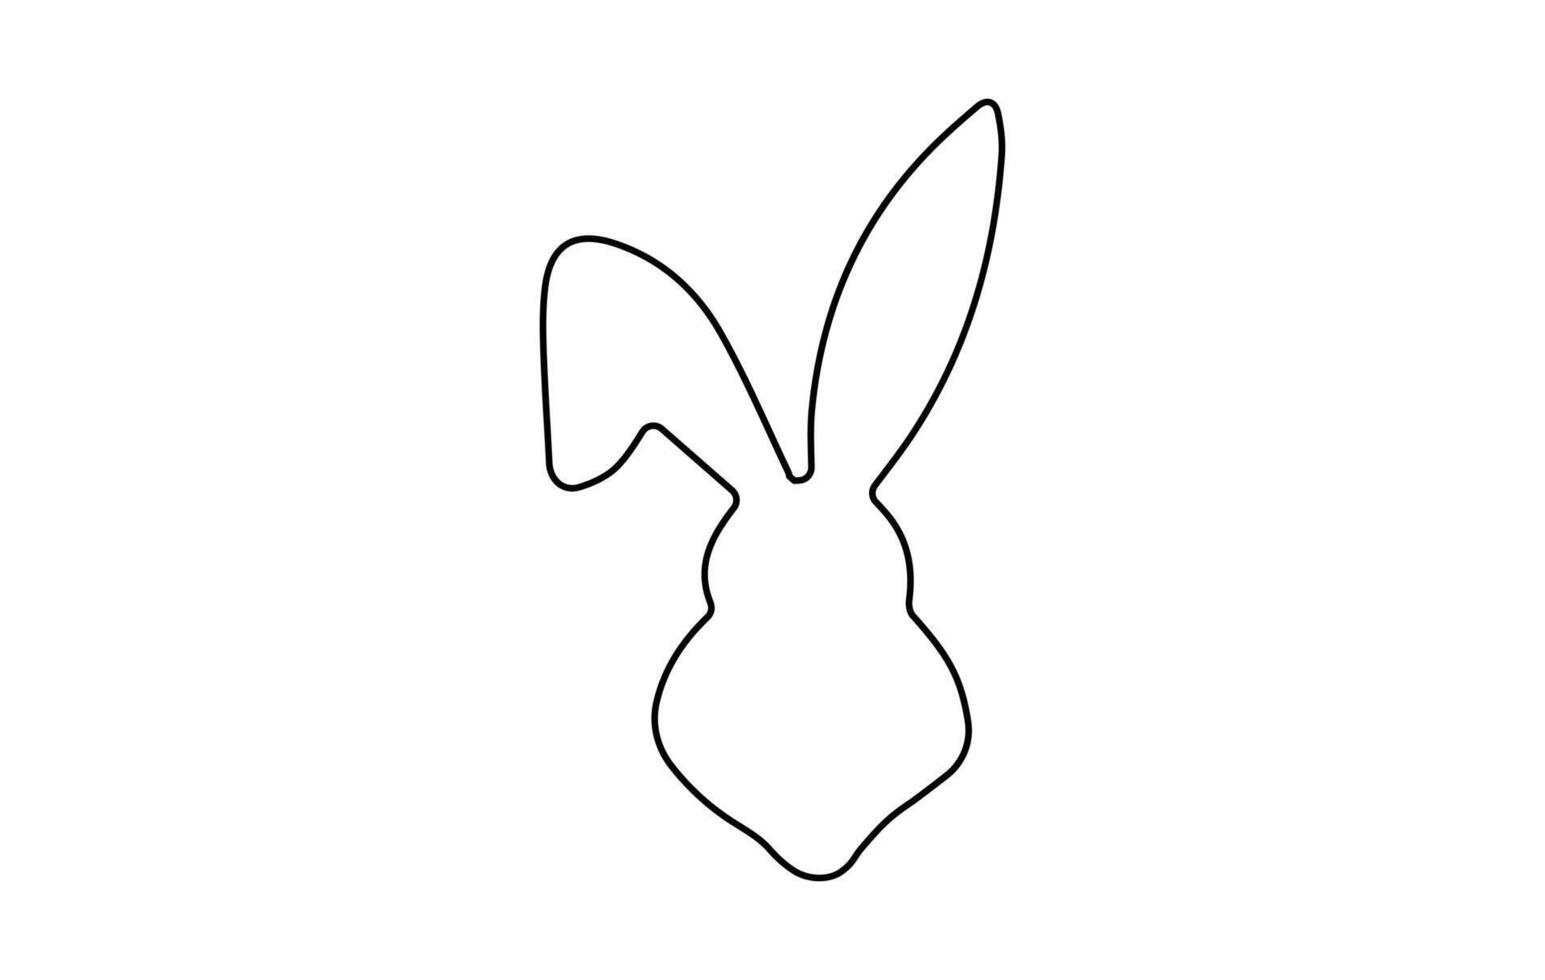 Rabbit head outline. Easter Bunny. Isolated on white background. A simple black icon of hare. Cute animal. Ideal for logo, emblem, pictogram, print, design element for greeting card, invitation vector